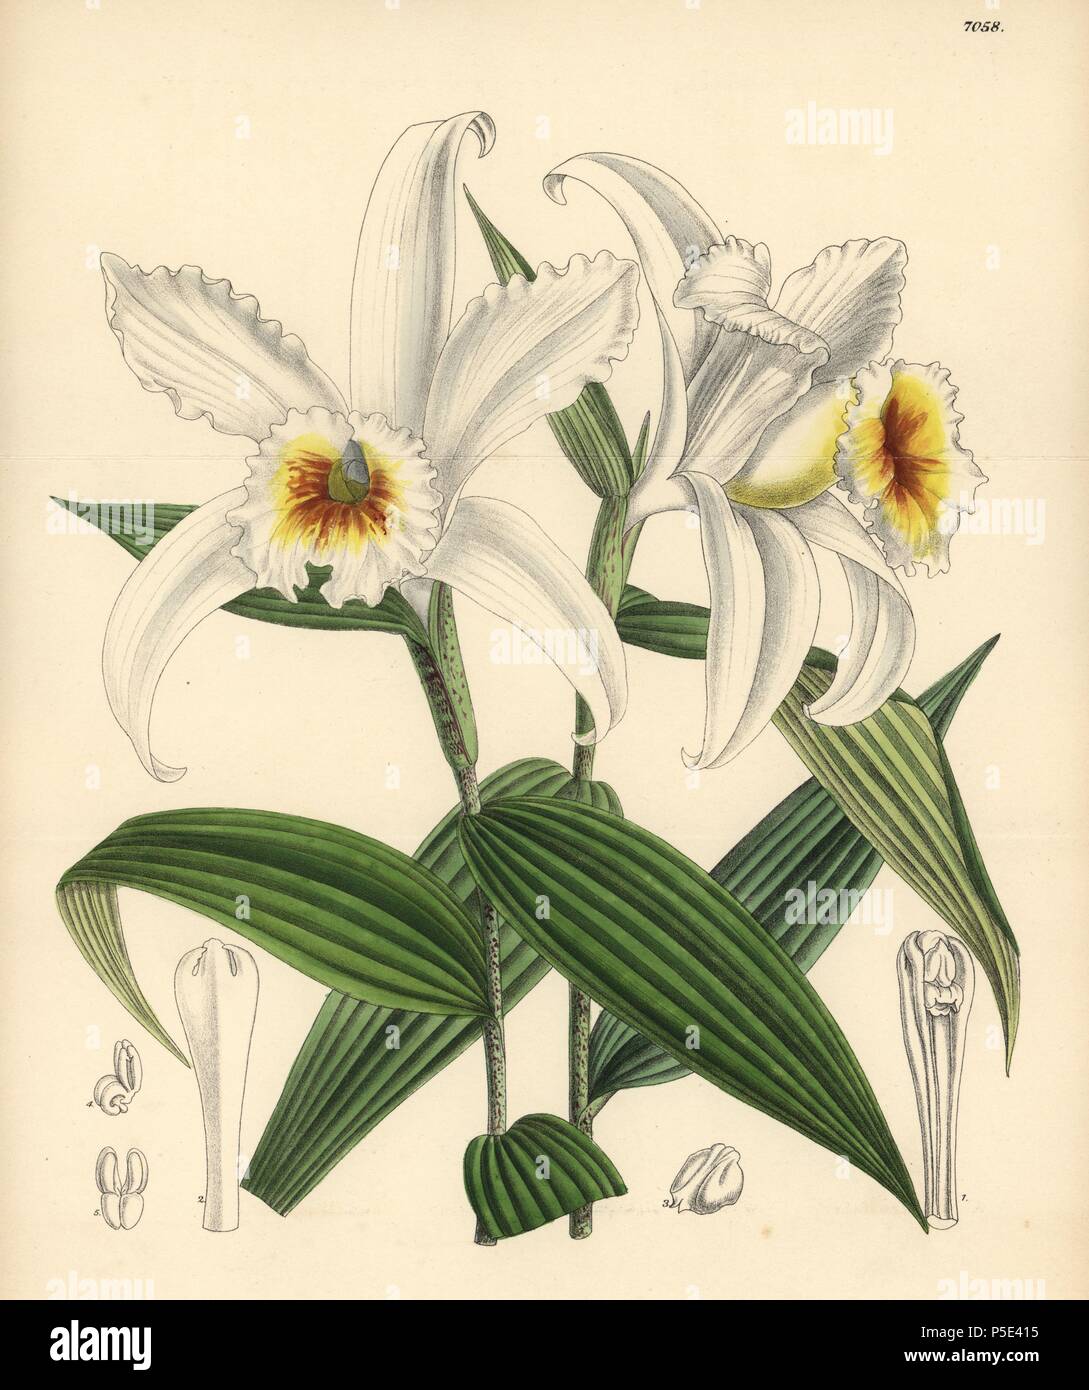 Sobralia leucoxantha, white orchid native to Costa Rica. Hand-coloured botanical illustration drawn by Matilda Smith and lithographed by J.N. Fitch from Joseph Dalton Hooker's 'Curtis's Botanical Magazine,' 1889, L. Reeve & Co. A second-cousin and pupil of Sir Joseph Dalton Hooker, Matilda Smith (1854-1926) was the main artist for the Botanical Magazine from 1887 until 1920 and contributed 2,300 illustrations. Stock Photo